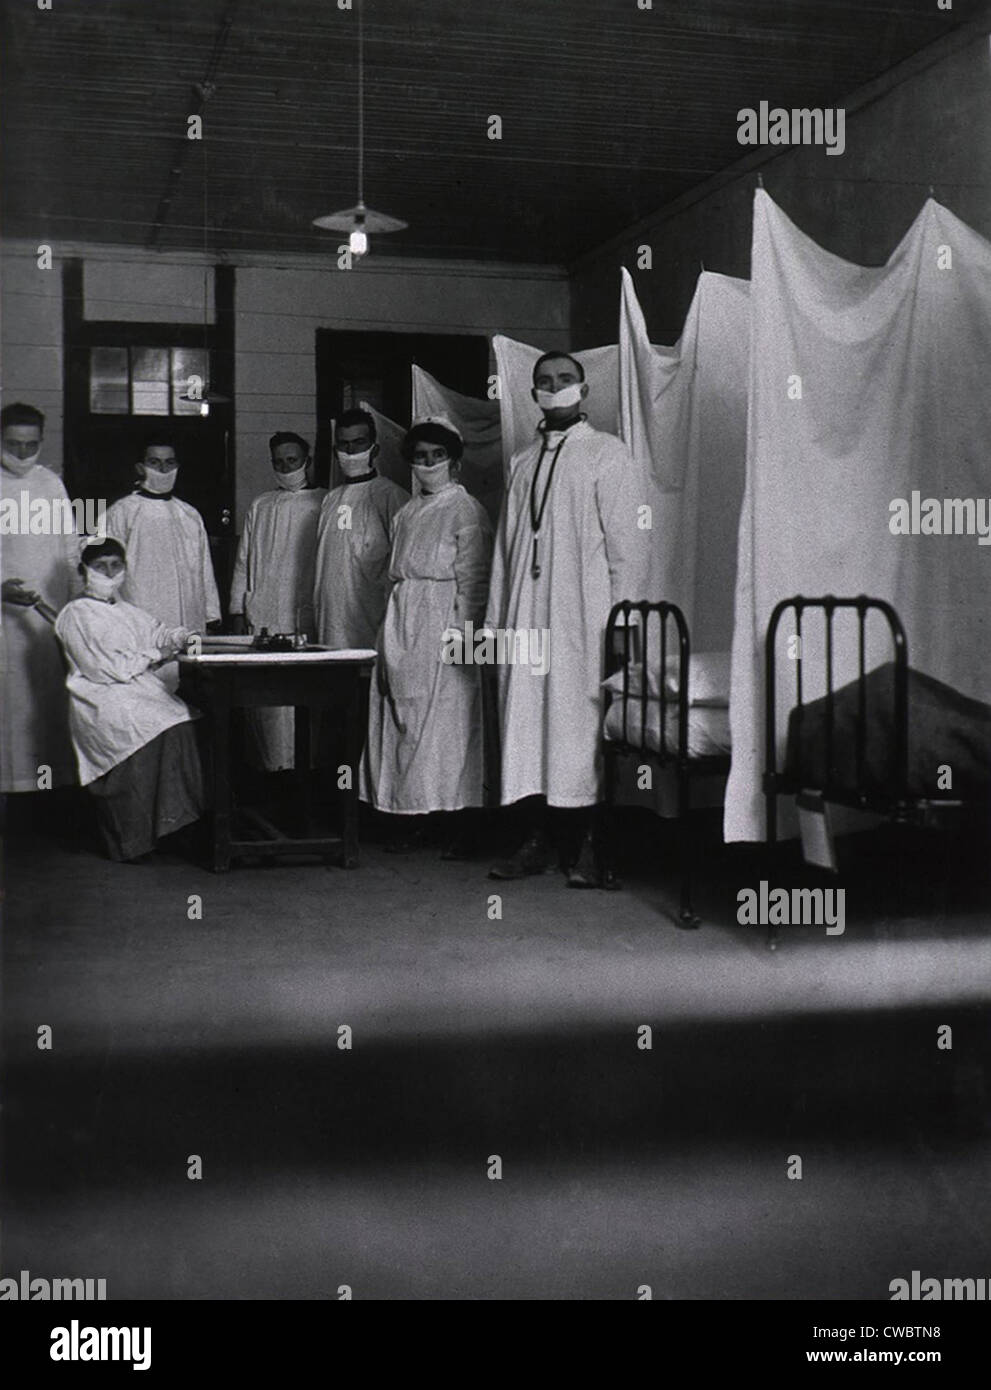 An pneumonia ward at the U. S. Army Base Hospital in Toul, France ...